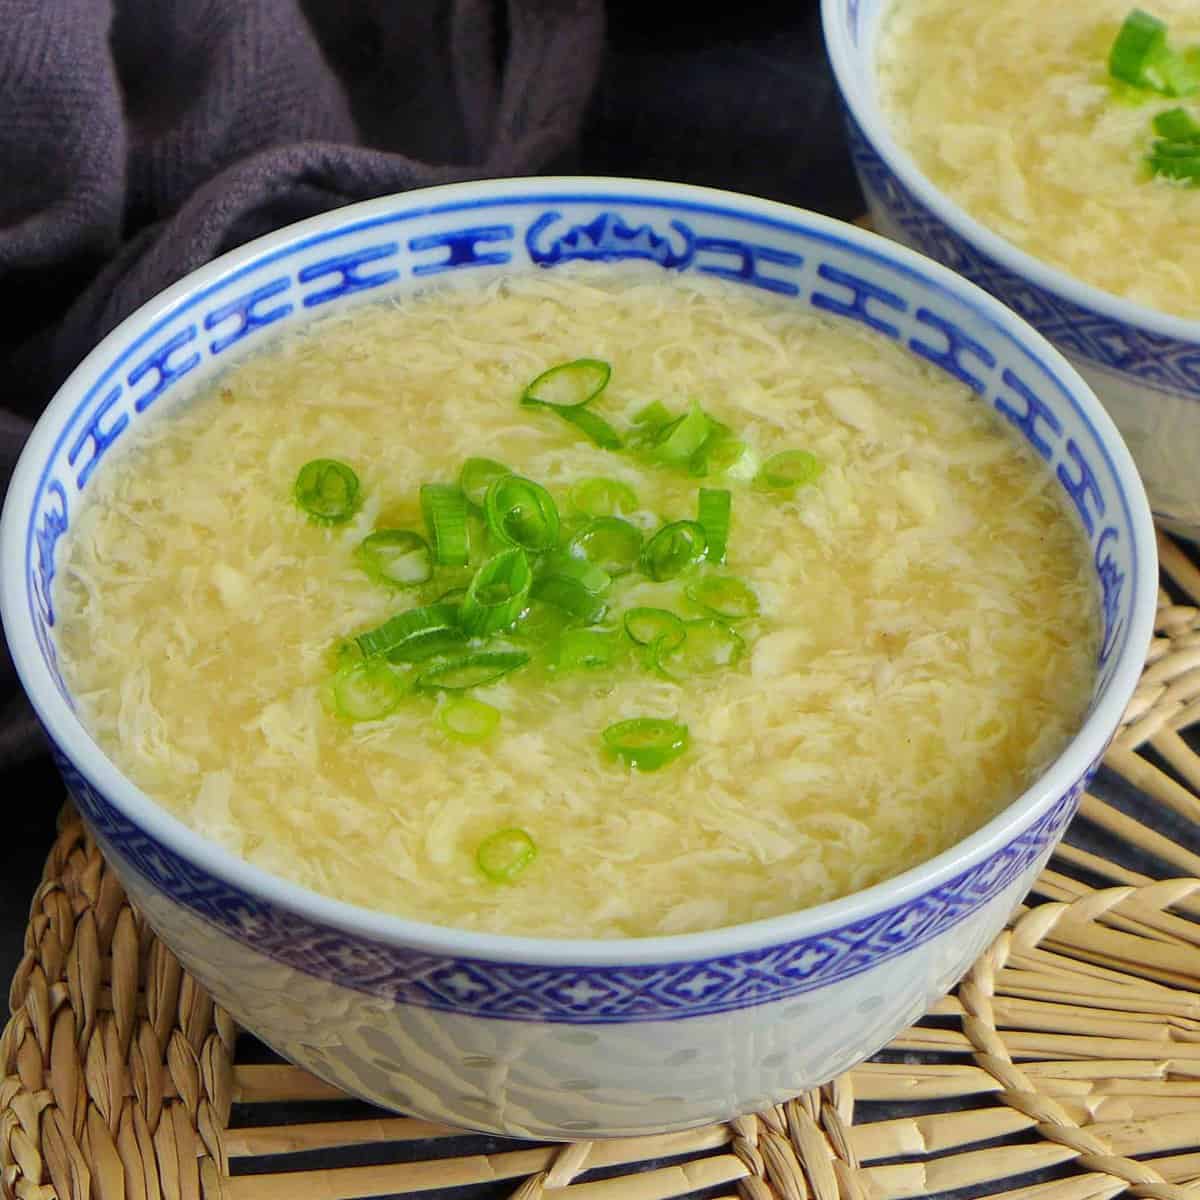 A bowl of egg drop soup with scallions.